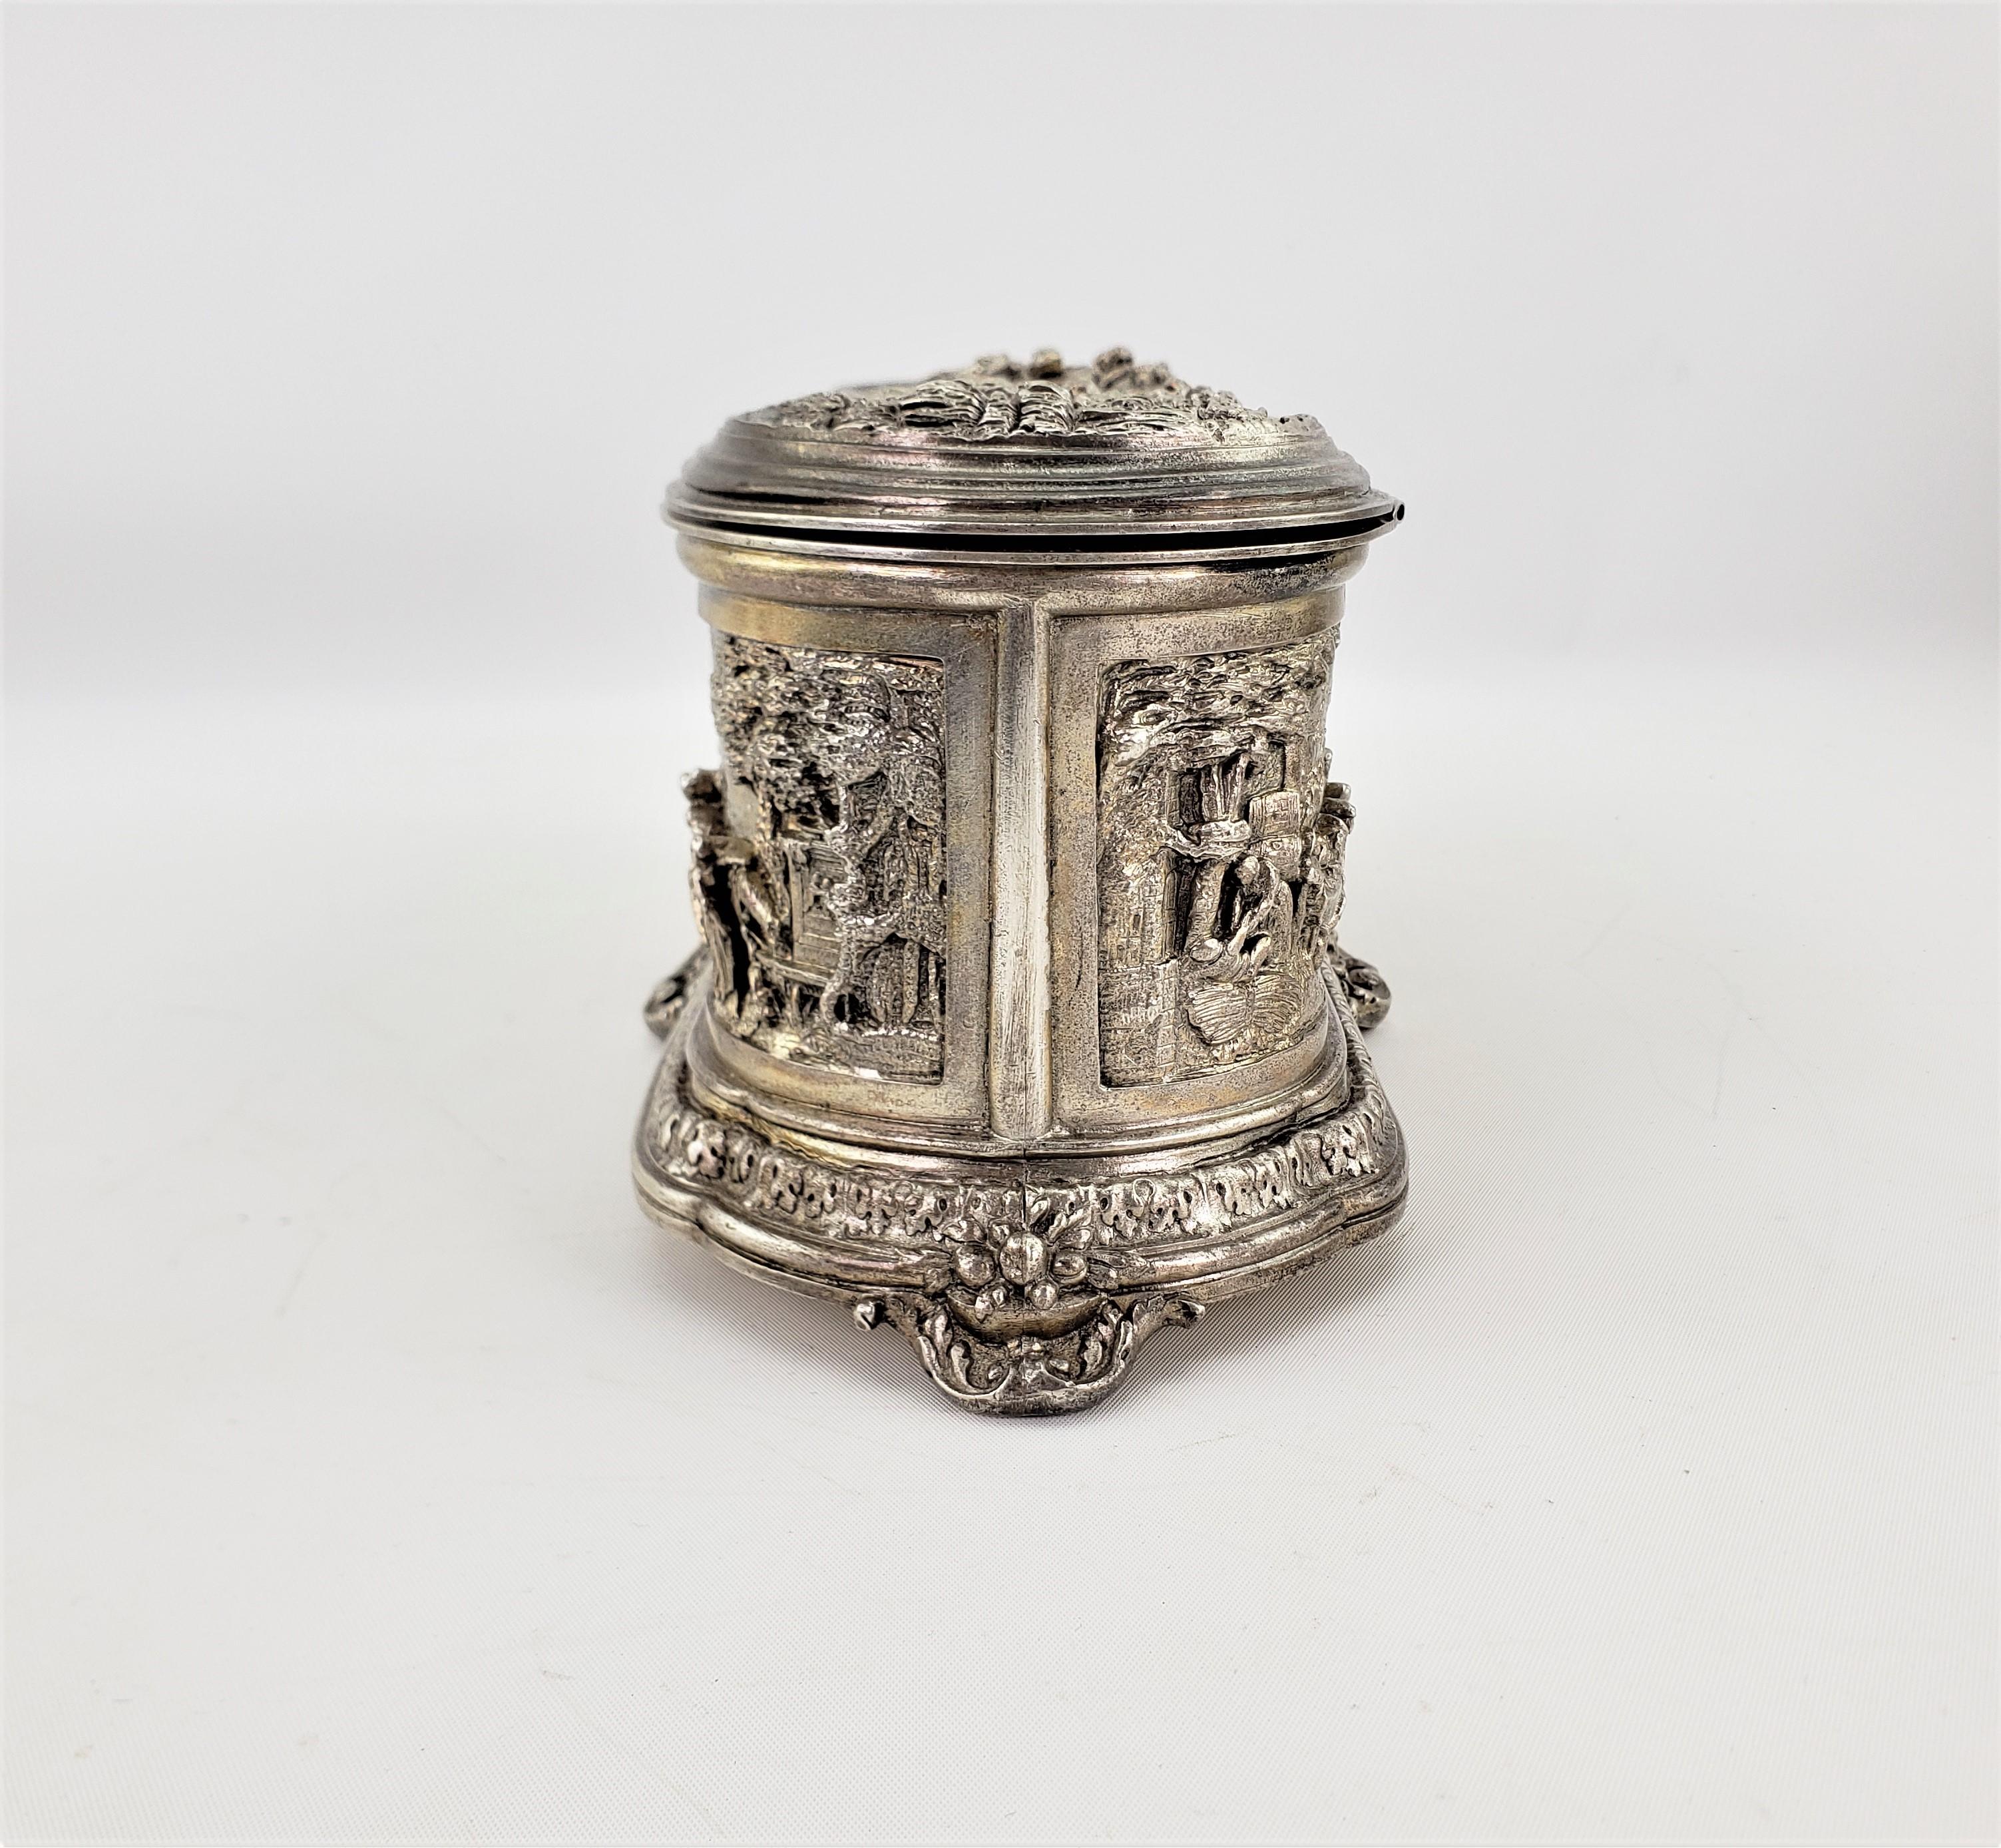 Machine-Made Large Antique Jewelry Casket or Box with Chased Vignettes and Lined Interior